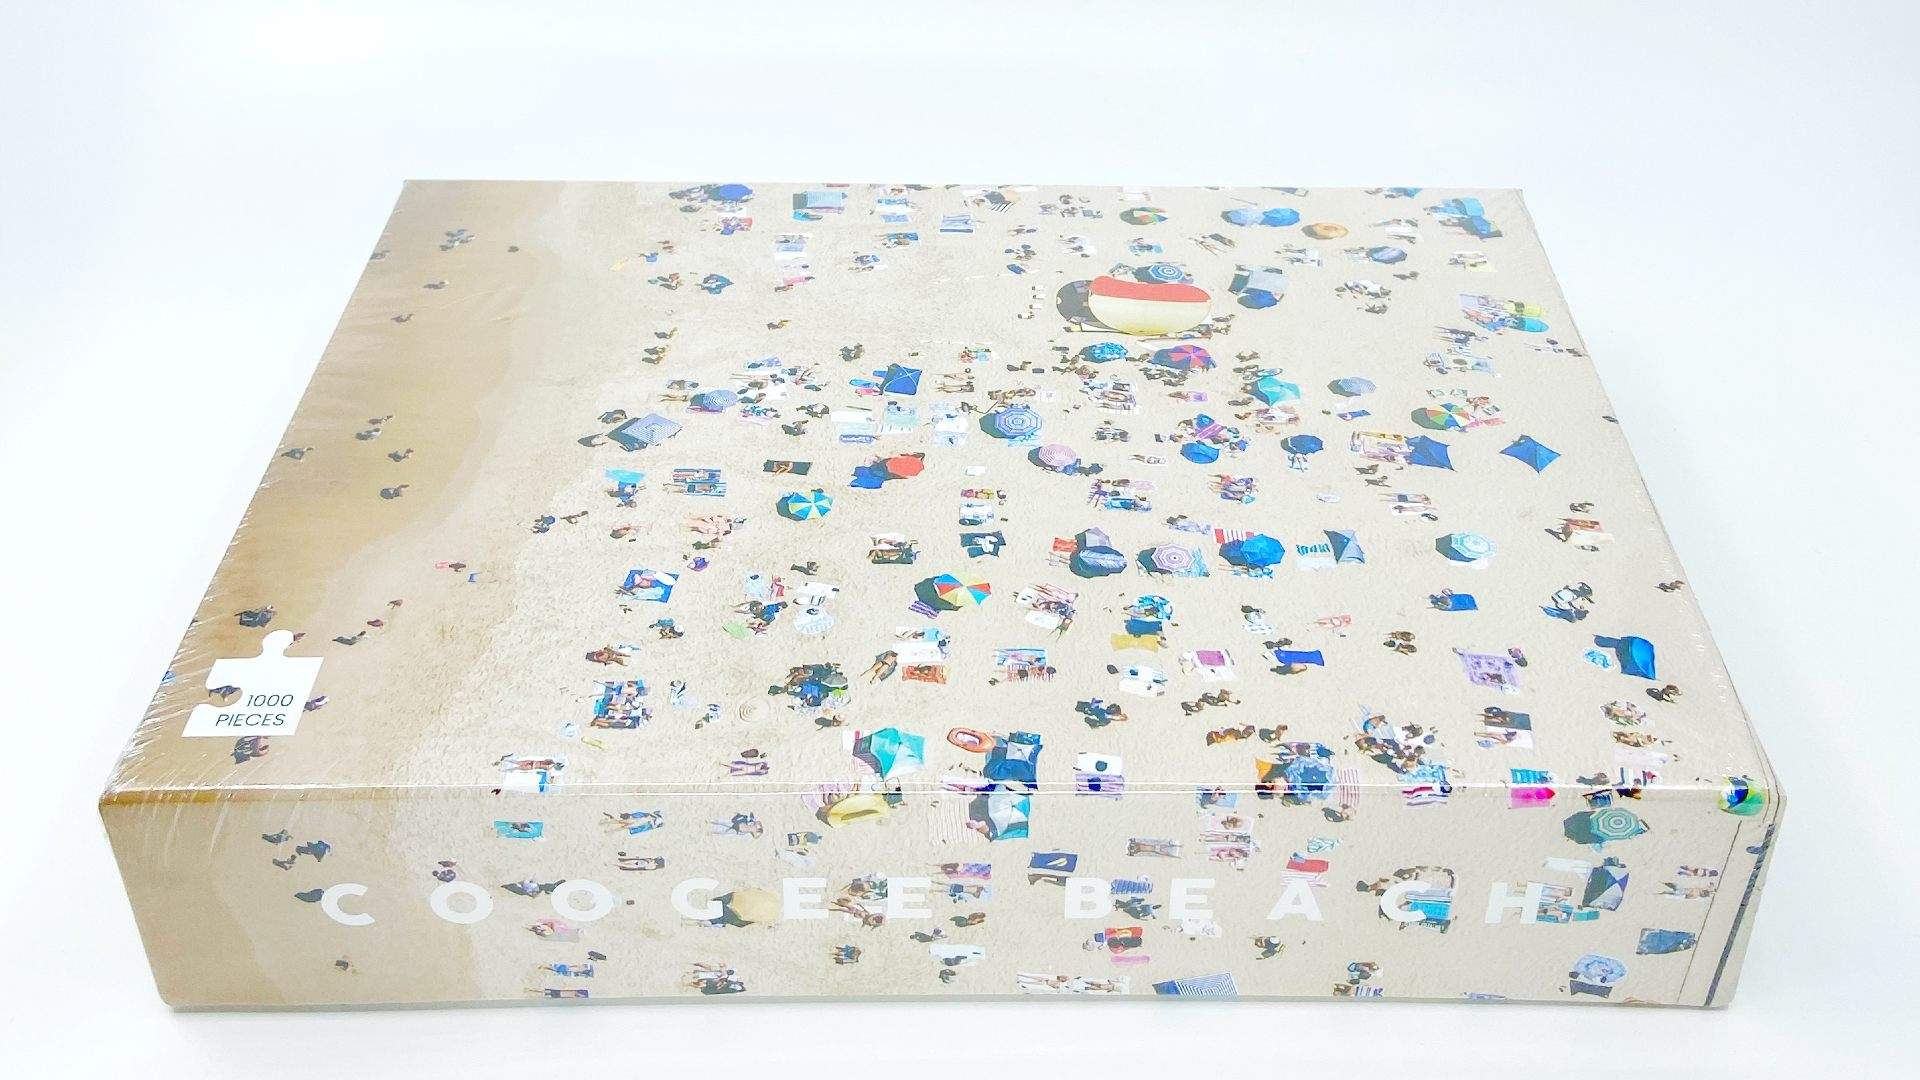 Sydney-Based Salty Gallery Is Turning Its Photos of NSW Beaches Into Jigsaw Puzzles